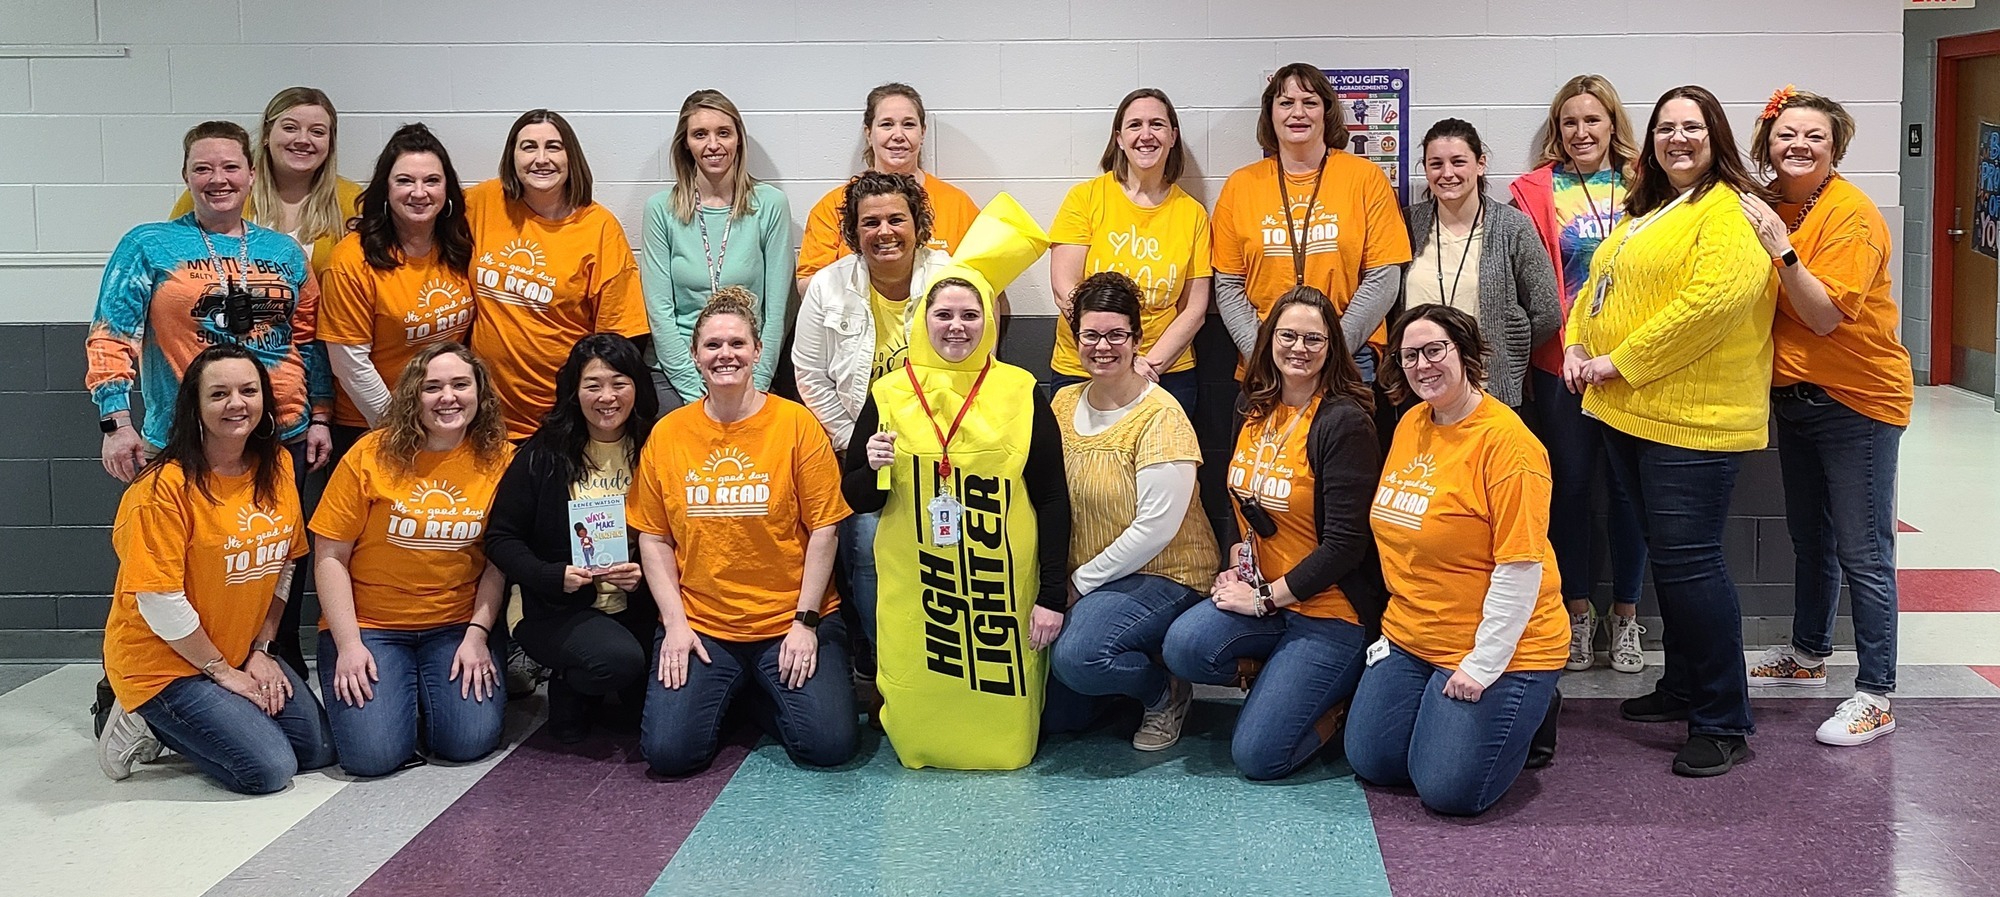 DEL staff with shirts that say "it's a good day to Read"